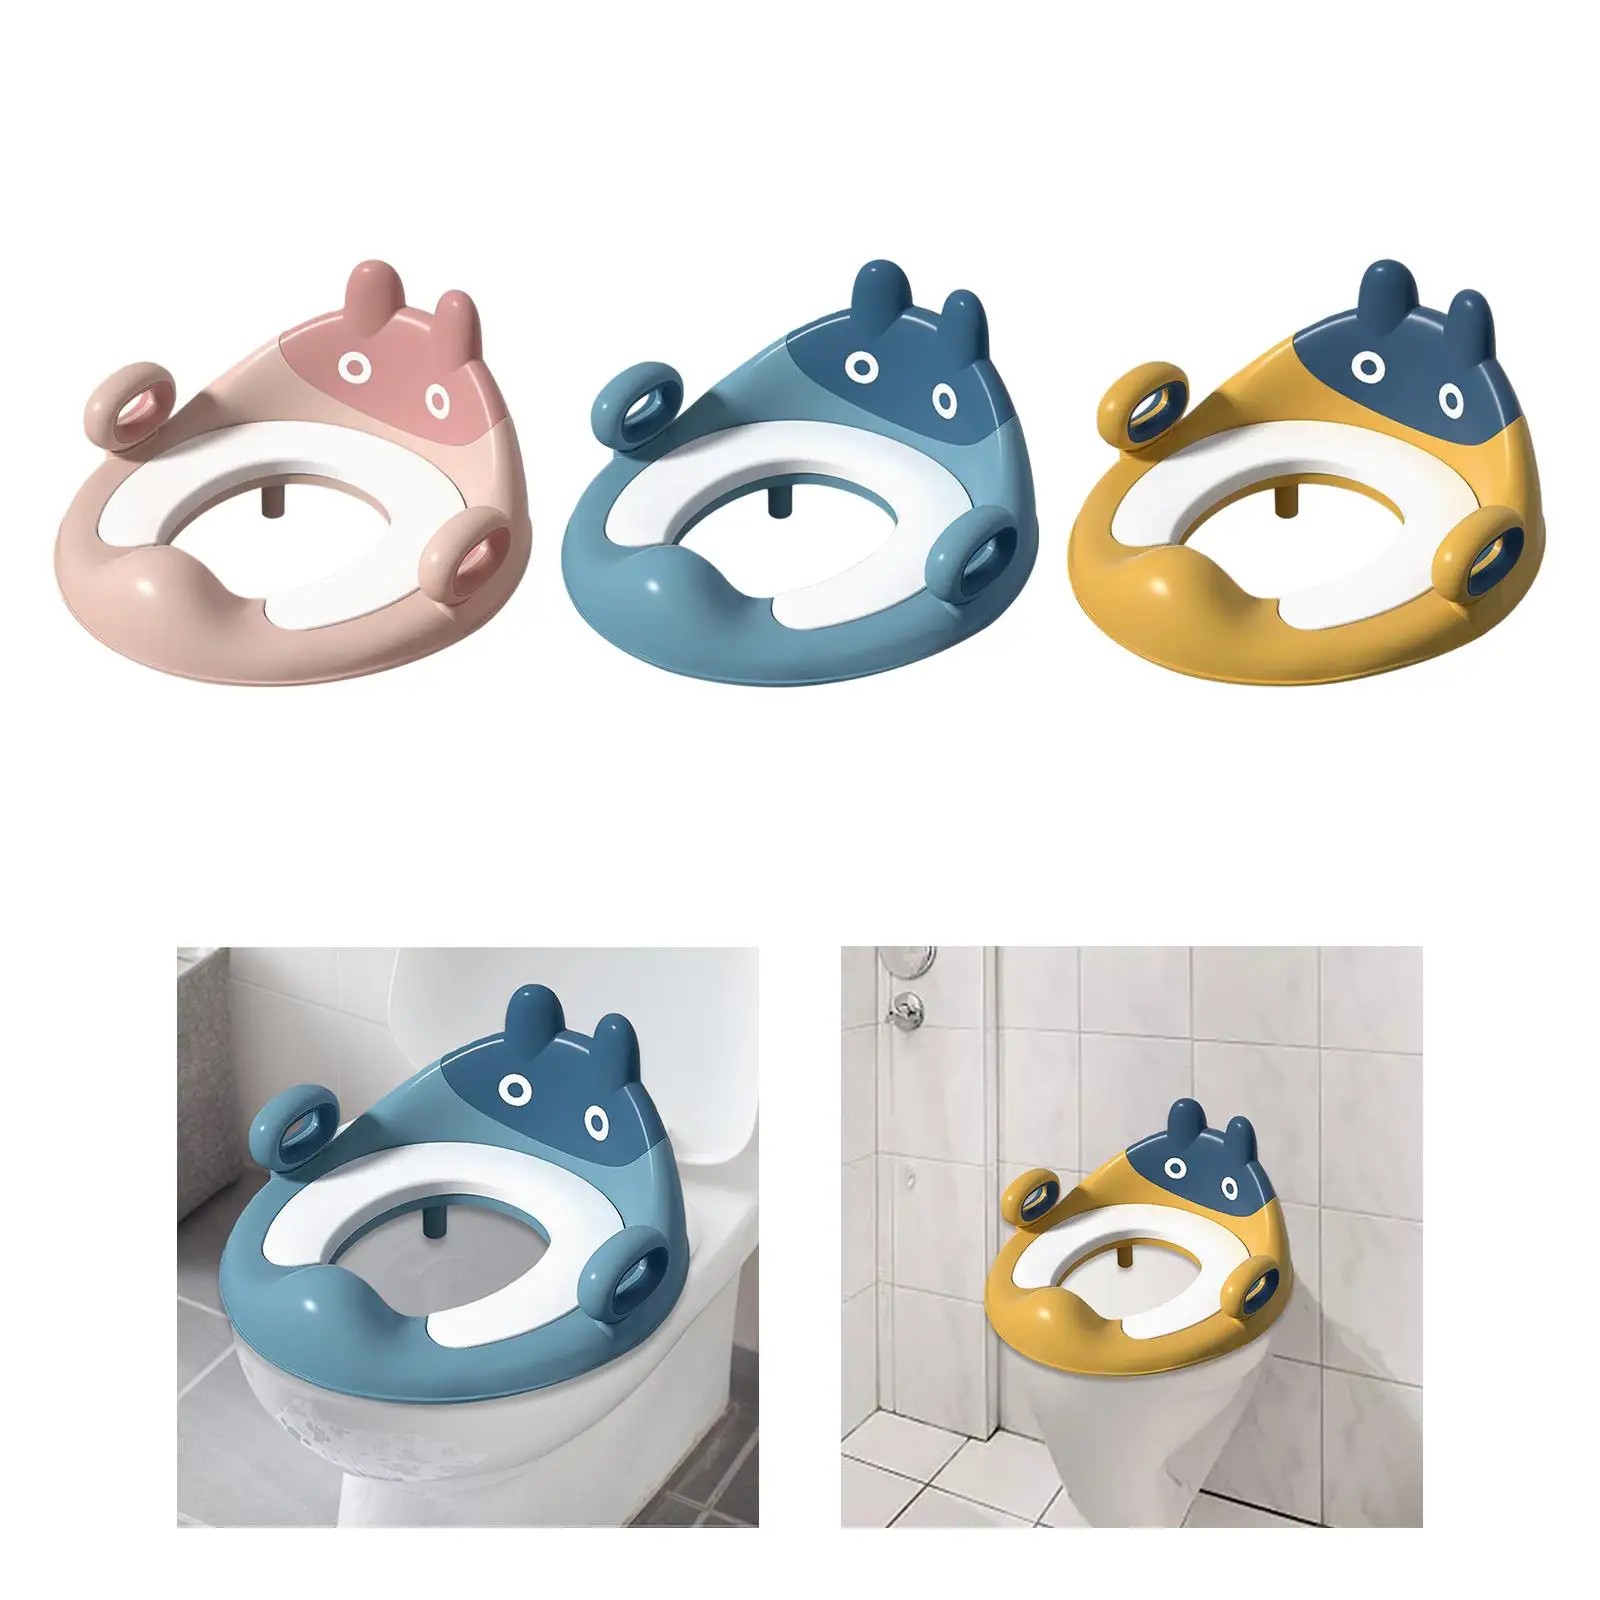 Toilet Training Seat Fits Most Toilets Comfortable Space Saving Nonslip Training Toilet for Kids for Children Kids Boy and Girl